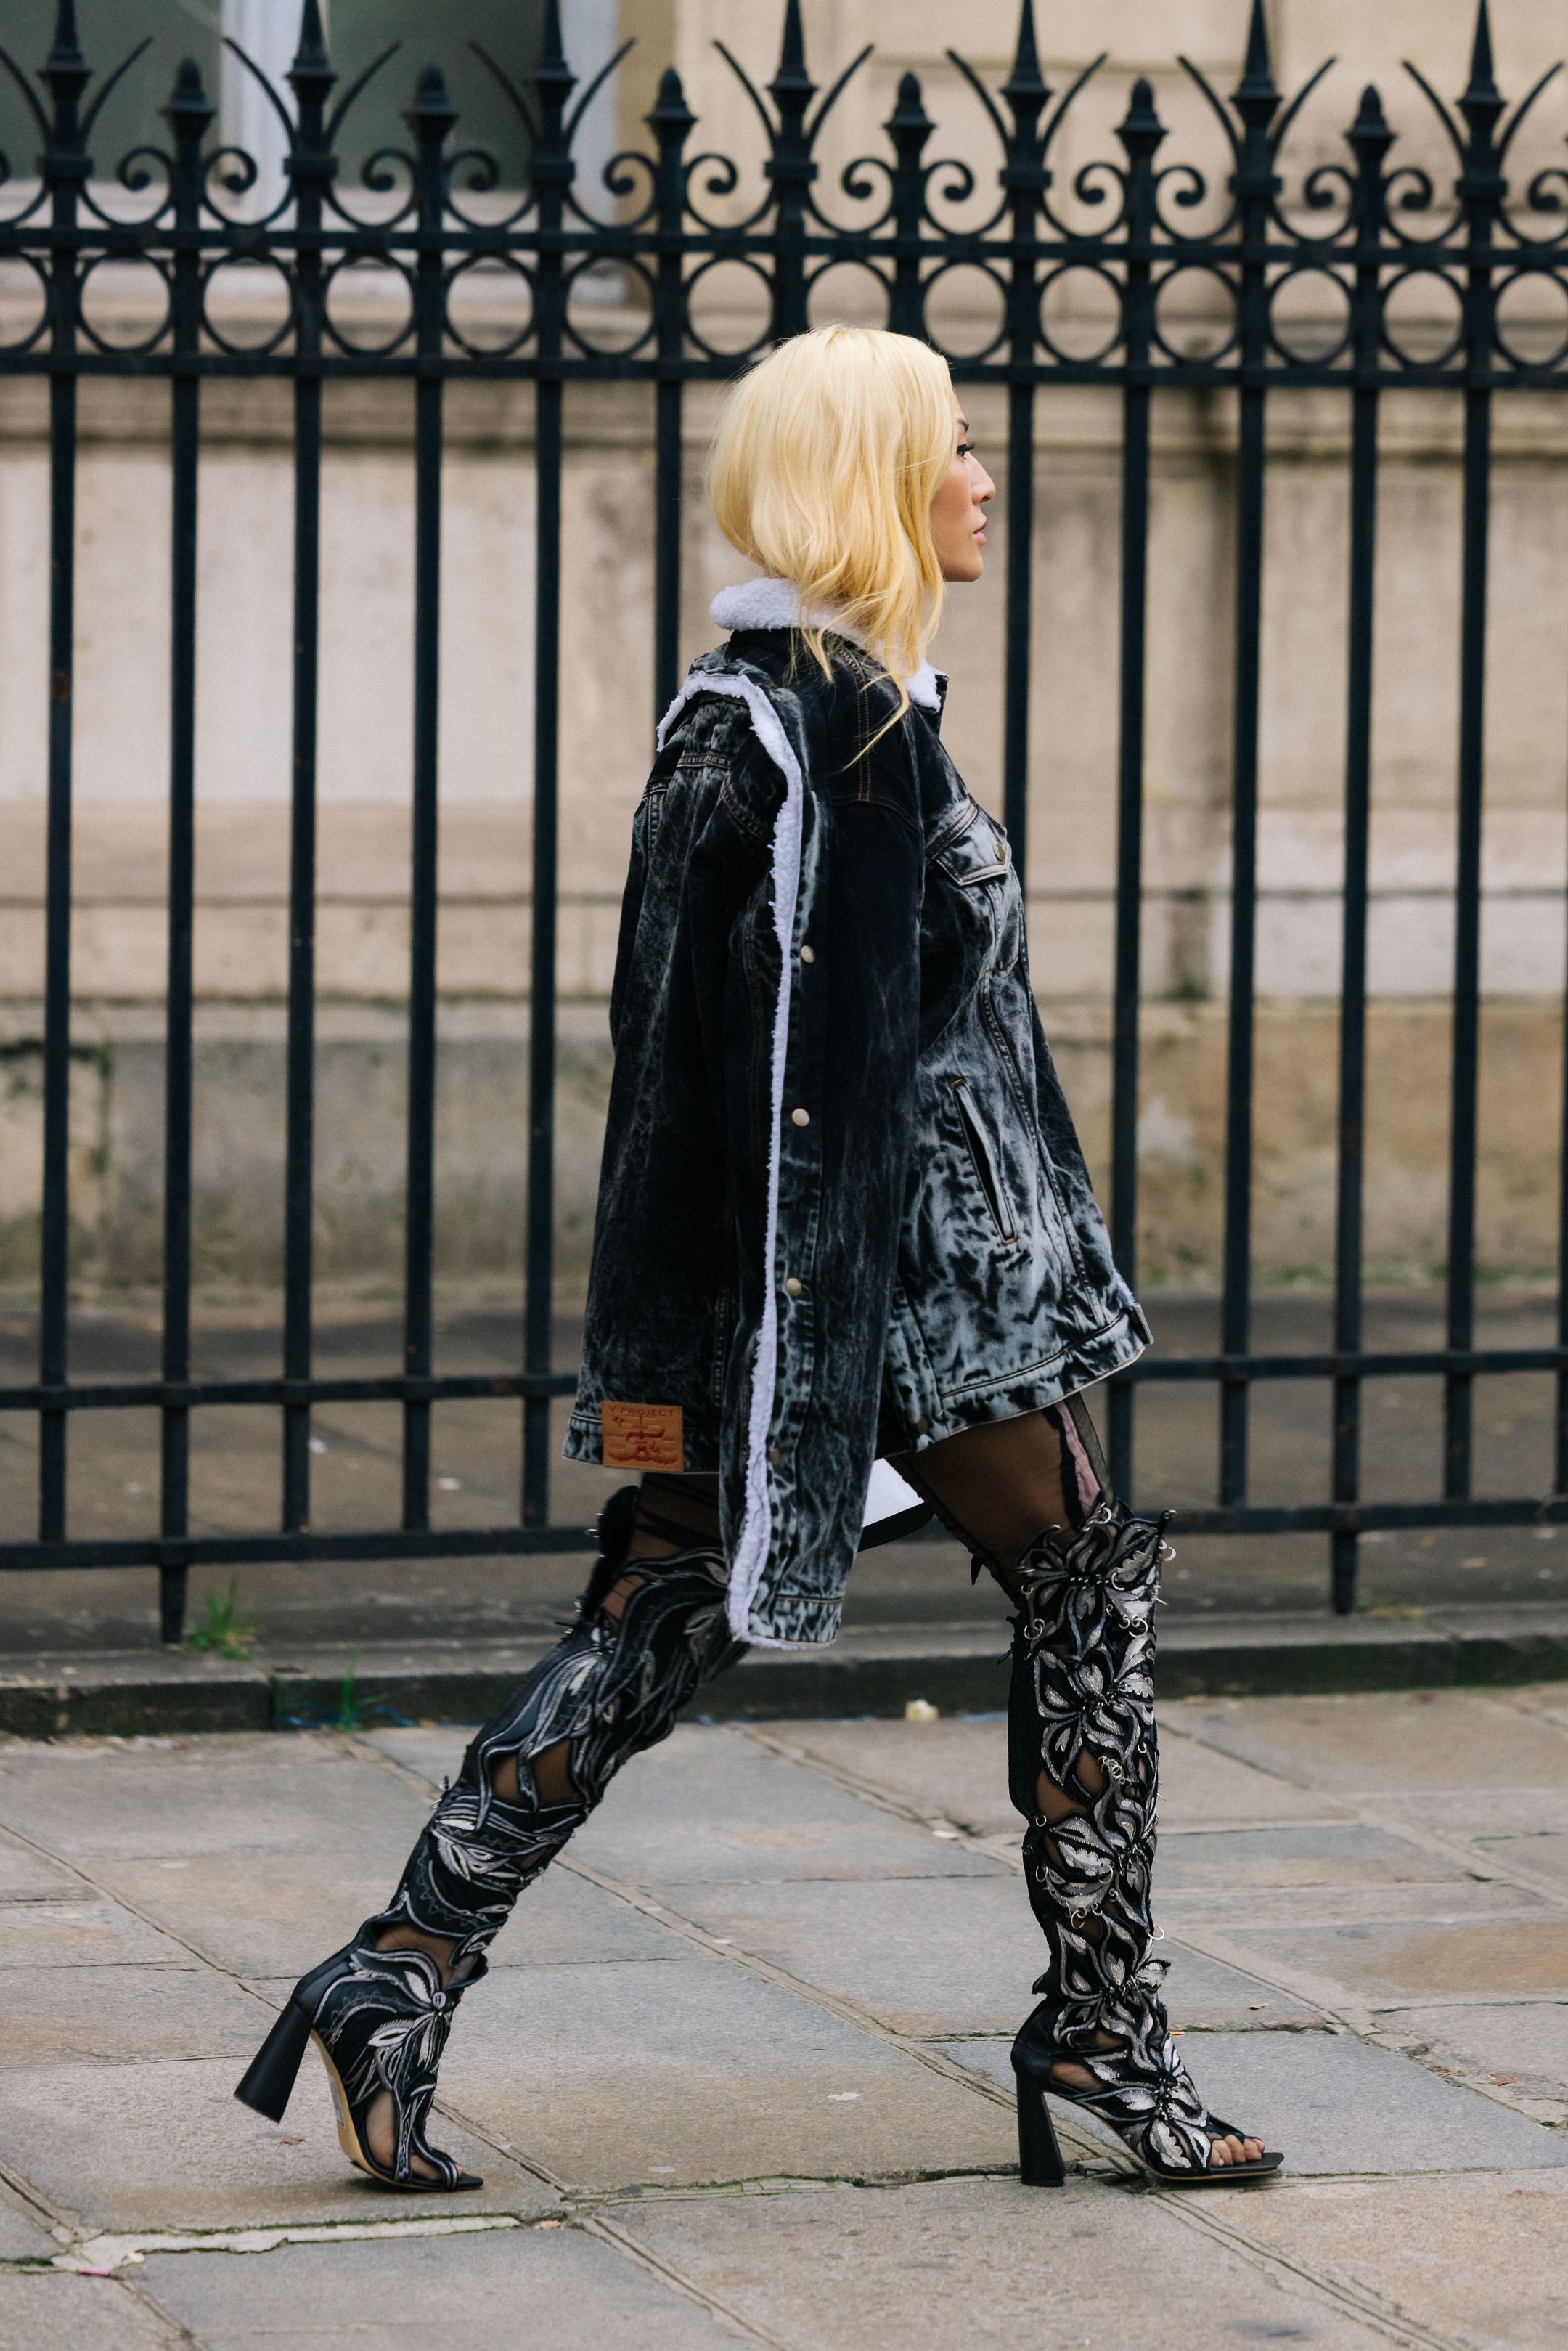 Shop Heels Inspired by Paris Fashion Week Street Style Stars—And